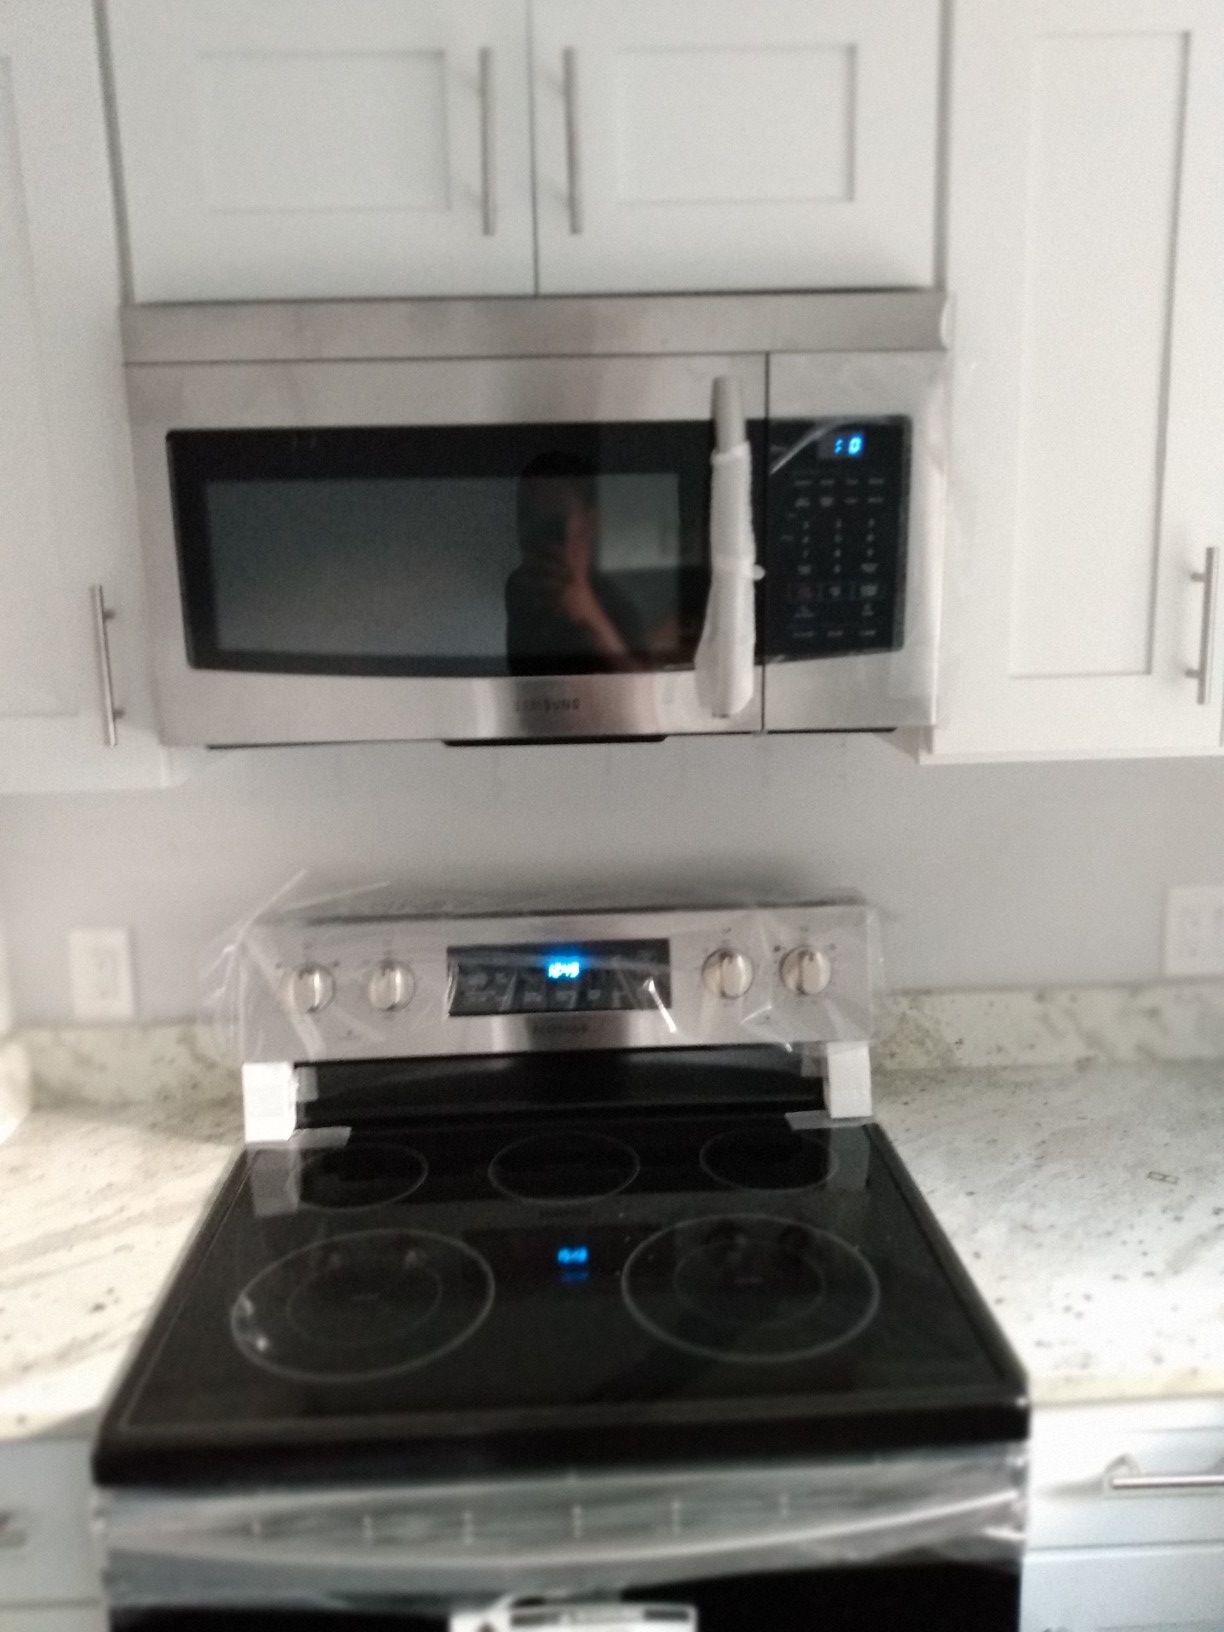 Samsung electric stove and microwave